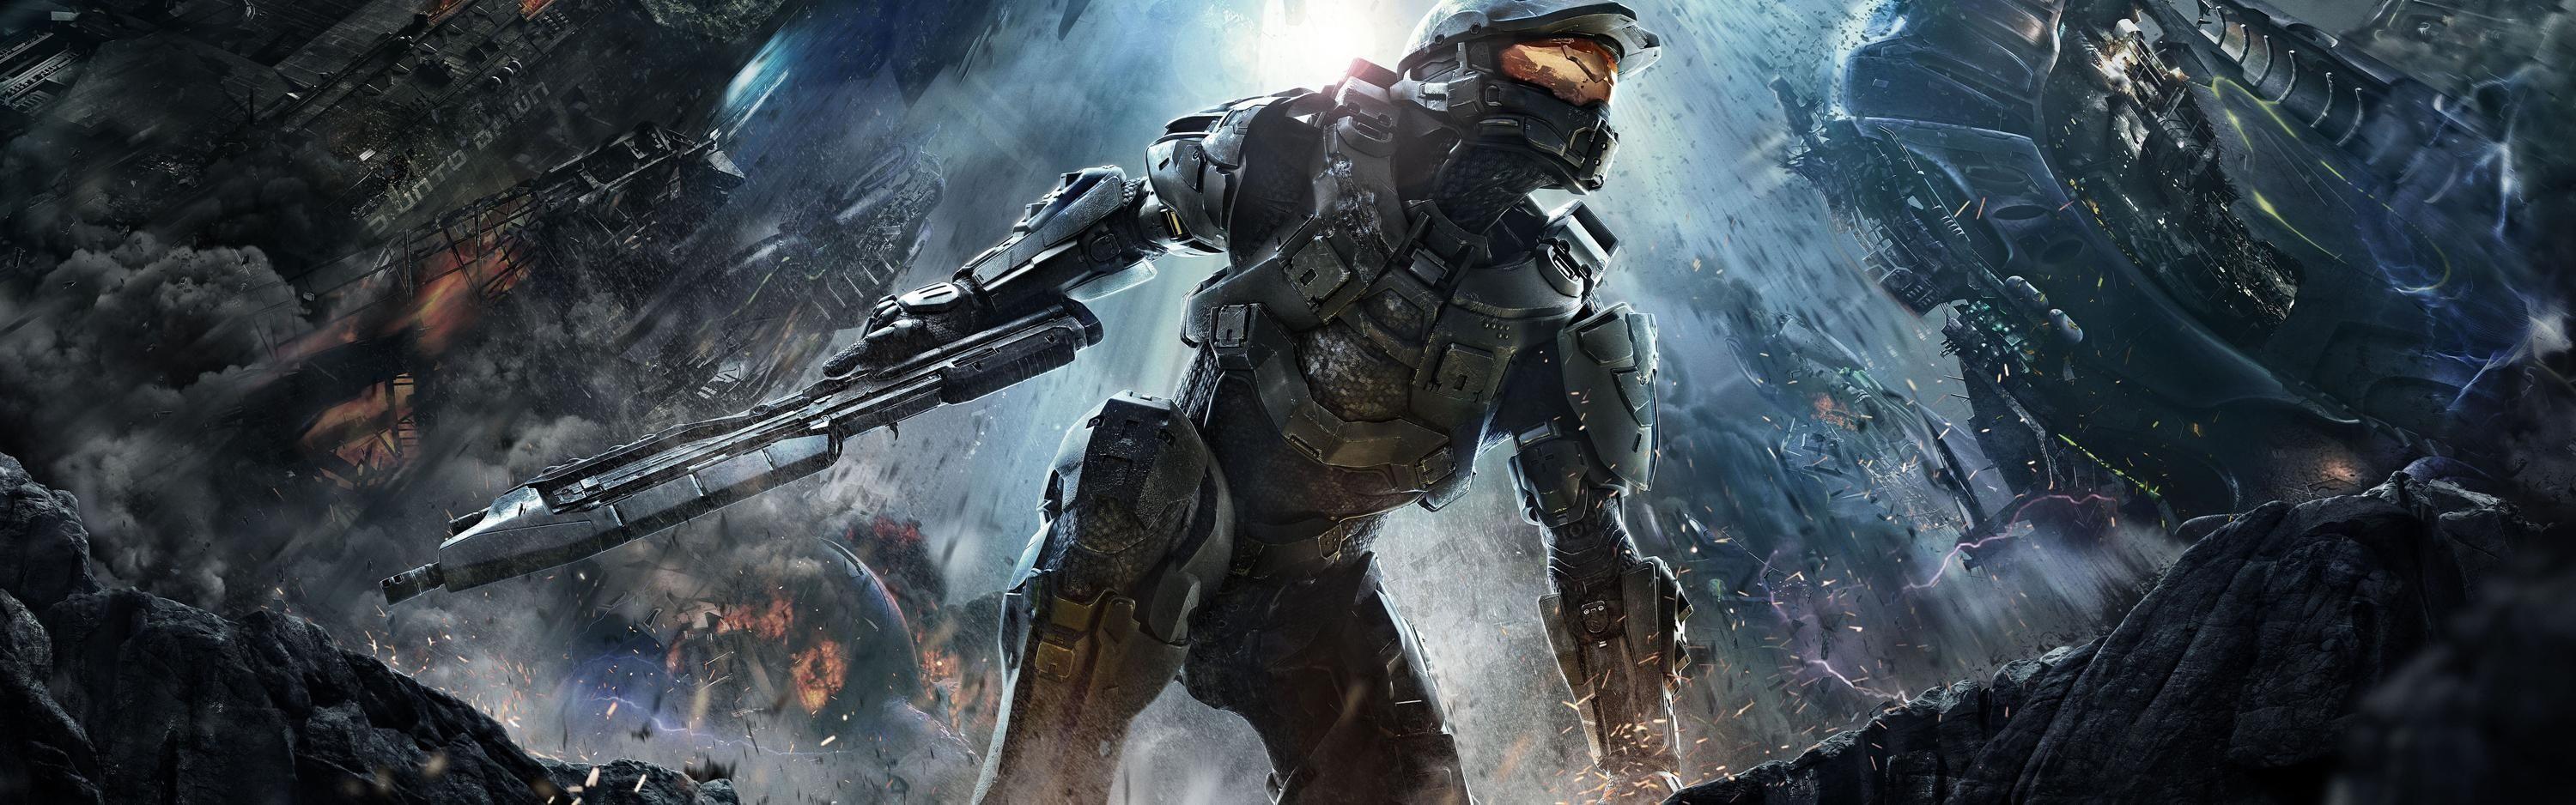 Halo Dual Monitor Wallpapers - Top Free Halo Dual Monitor Backgrounds